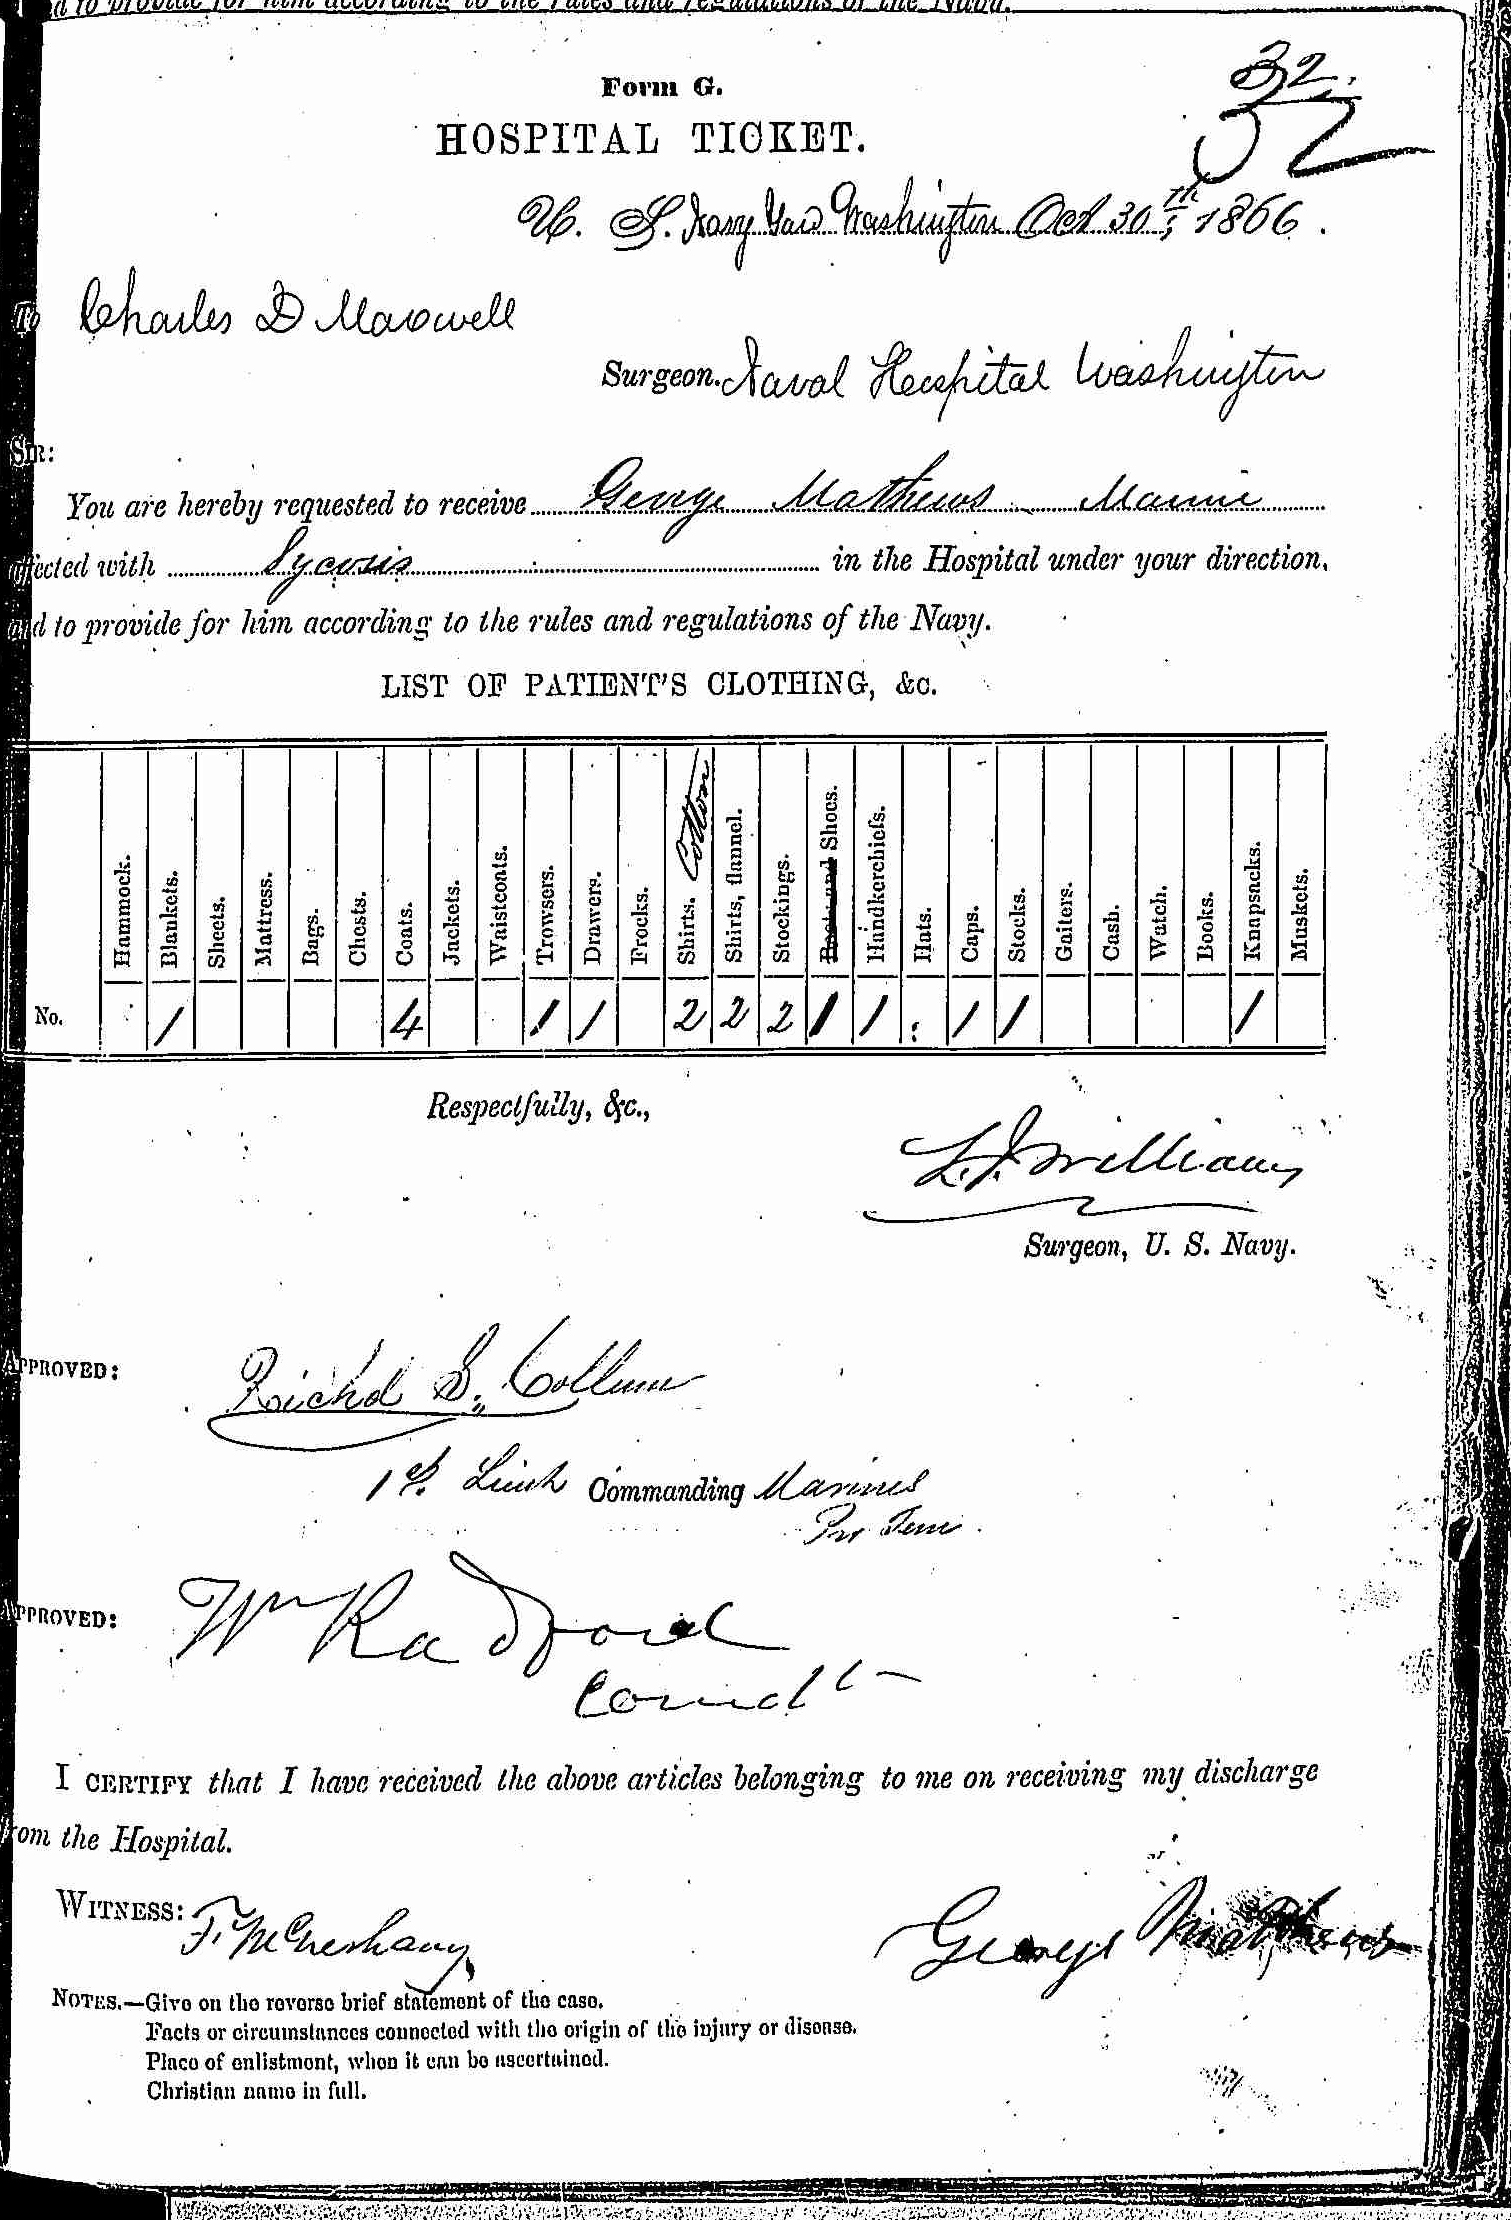 Entry for George Mathews (page 1 of 2) in the log Hospital Tickets and Case Papers - Naval Hospital - Washington, D.C. - 1865-68